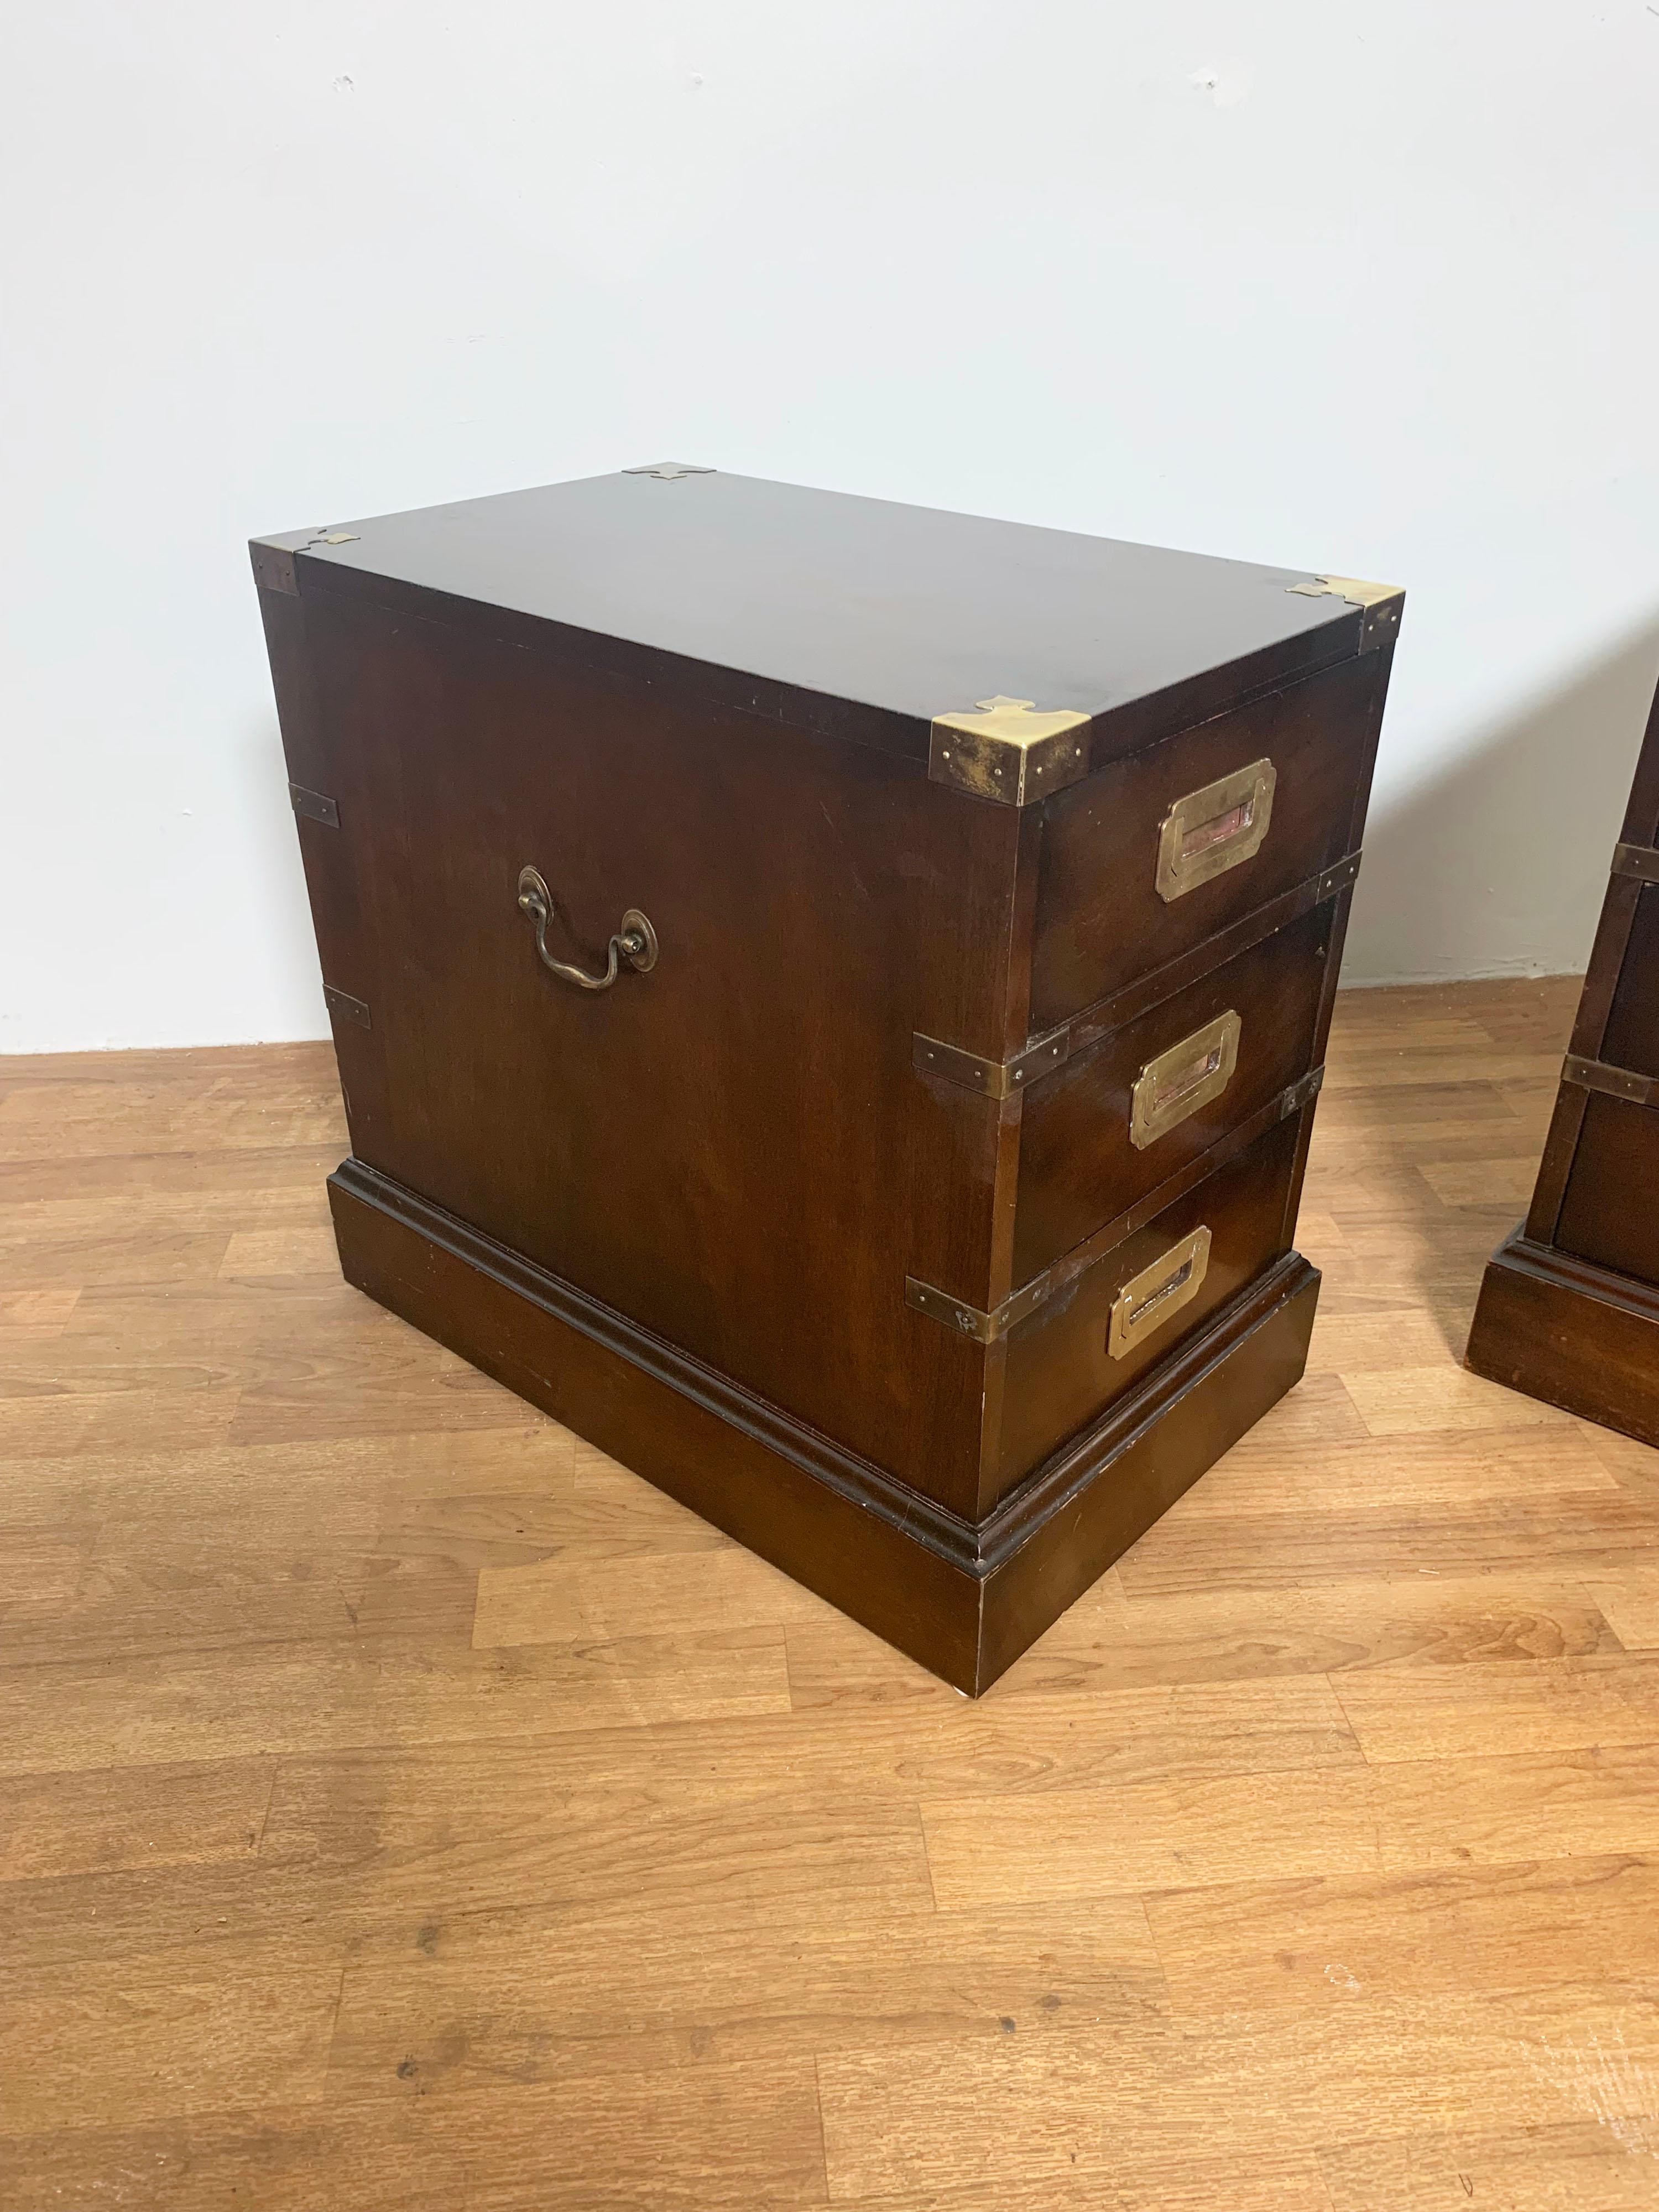 A pair of British made three drawer campaign style chests in mahogany, featuring brass corners, strapping on all three drawers, baseboard molding and working lift handles. Finished backs make these a great side / end table option; also perfectly